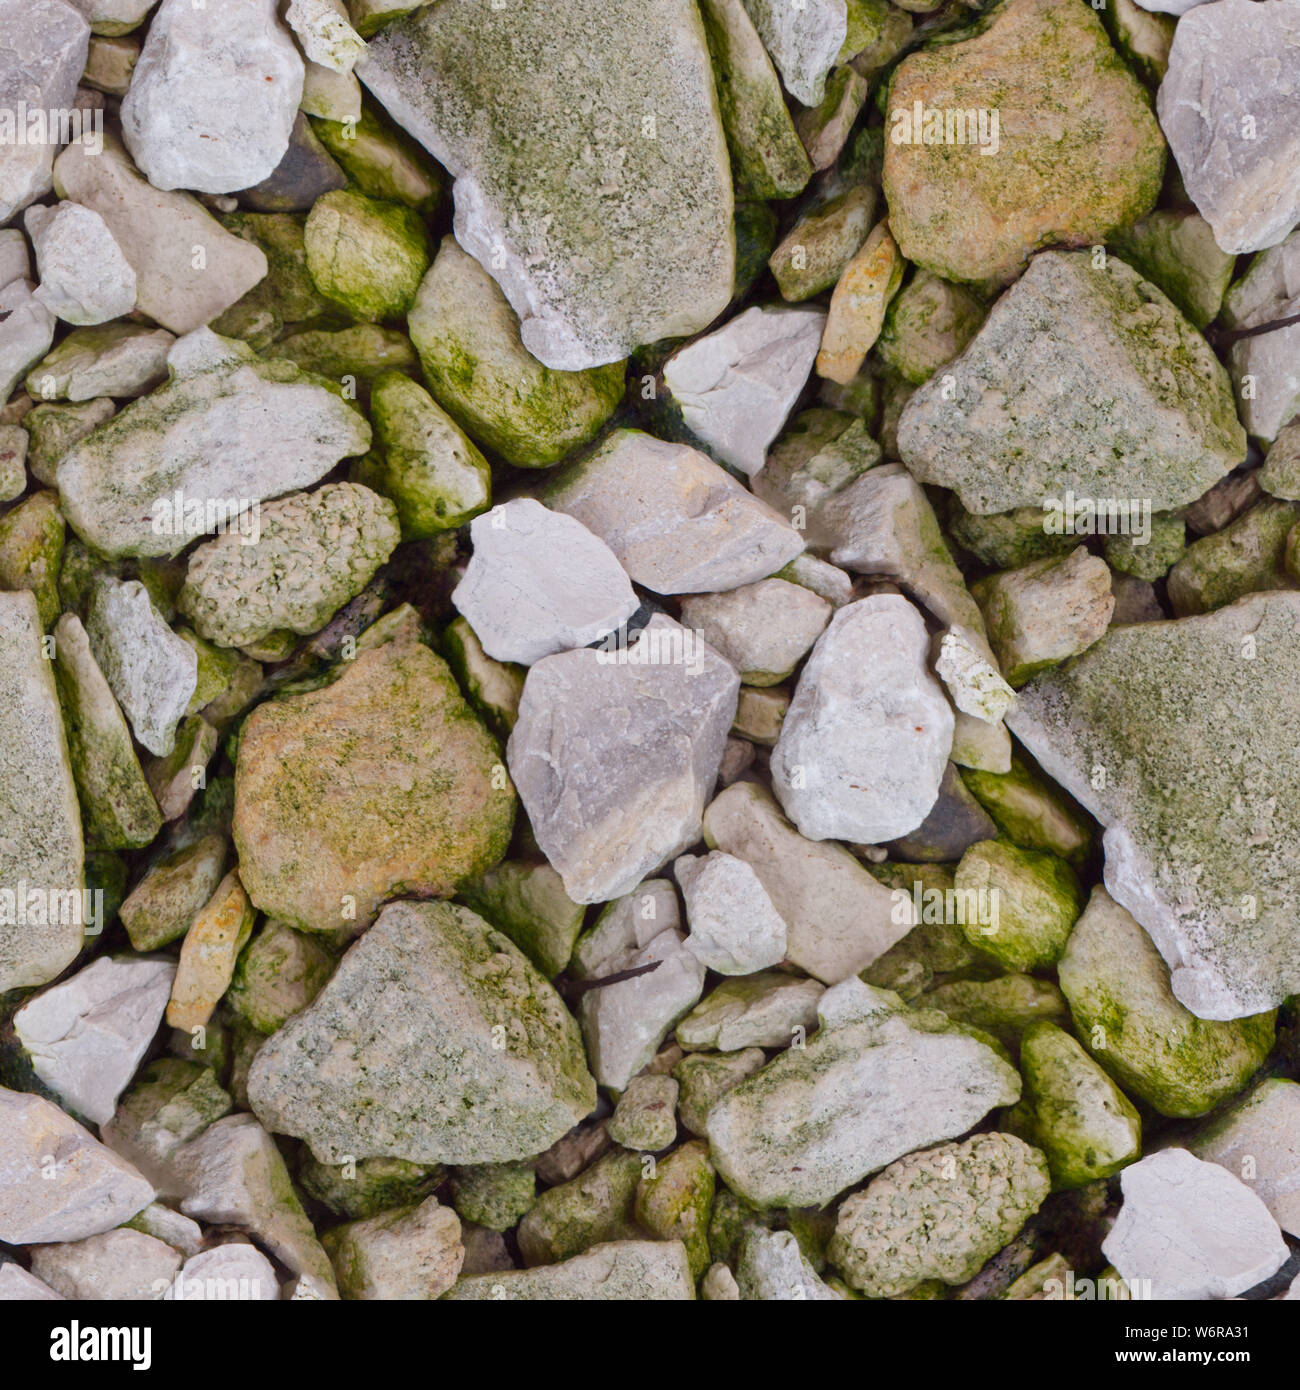 Abstract seamless photo pattern for designers or developers. Various broken rocks with moss fragments and rust. Stock Photo